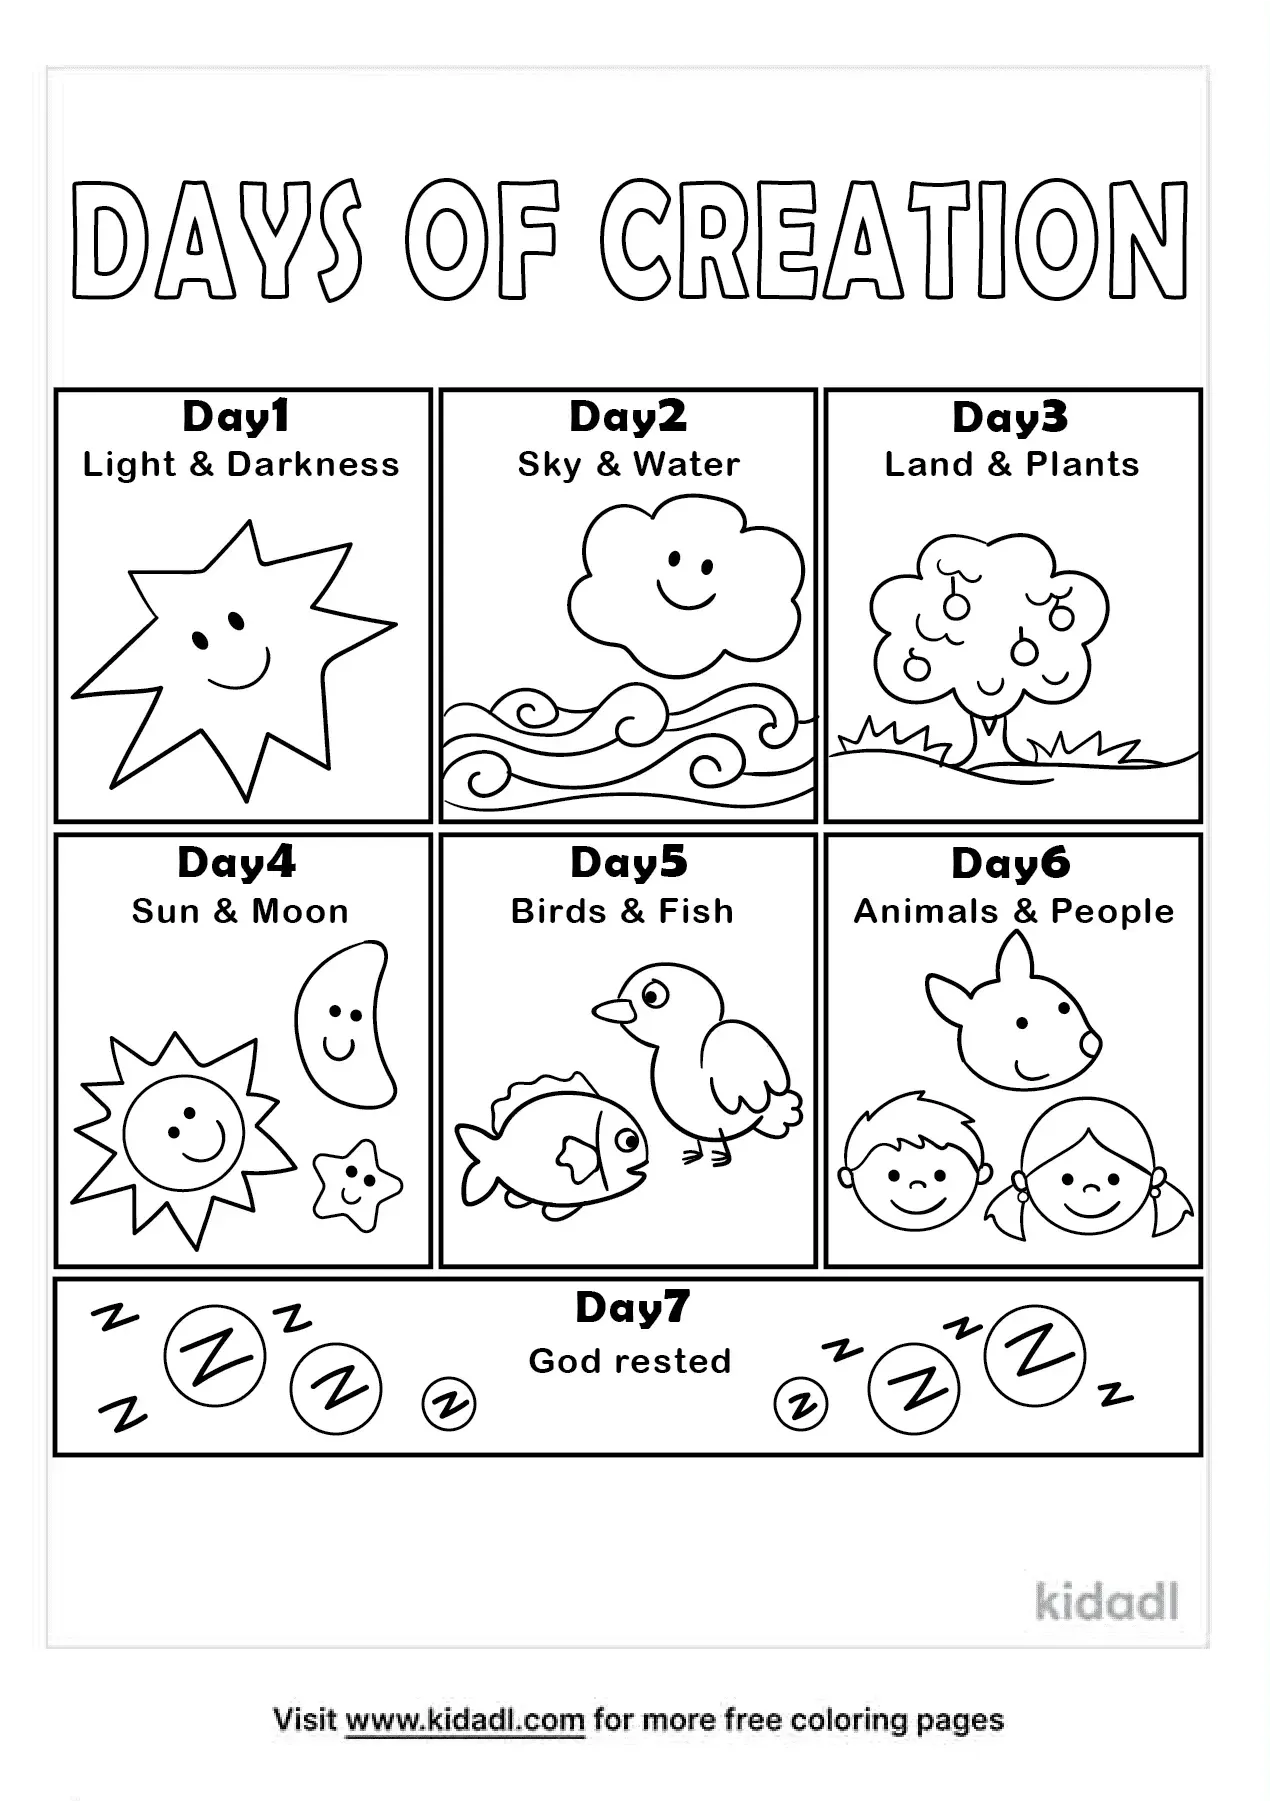 free-7-days-of-creation-coloring-page-coloring-page-printables-kidadl